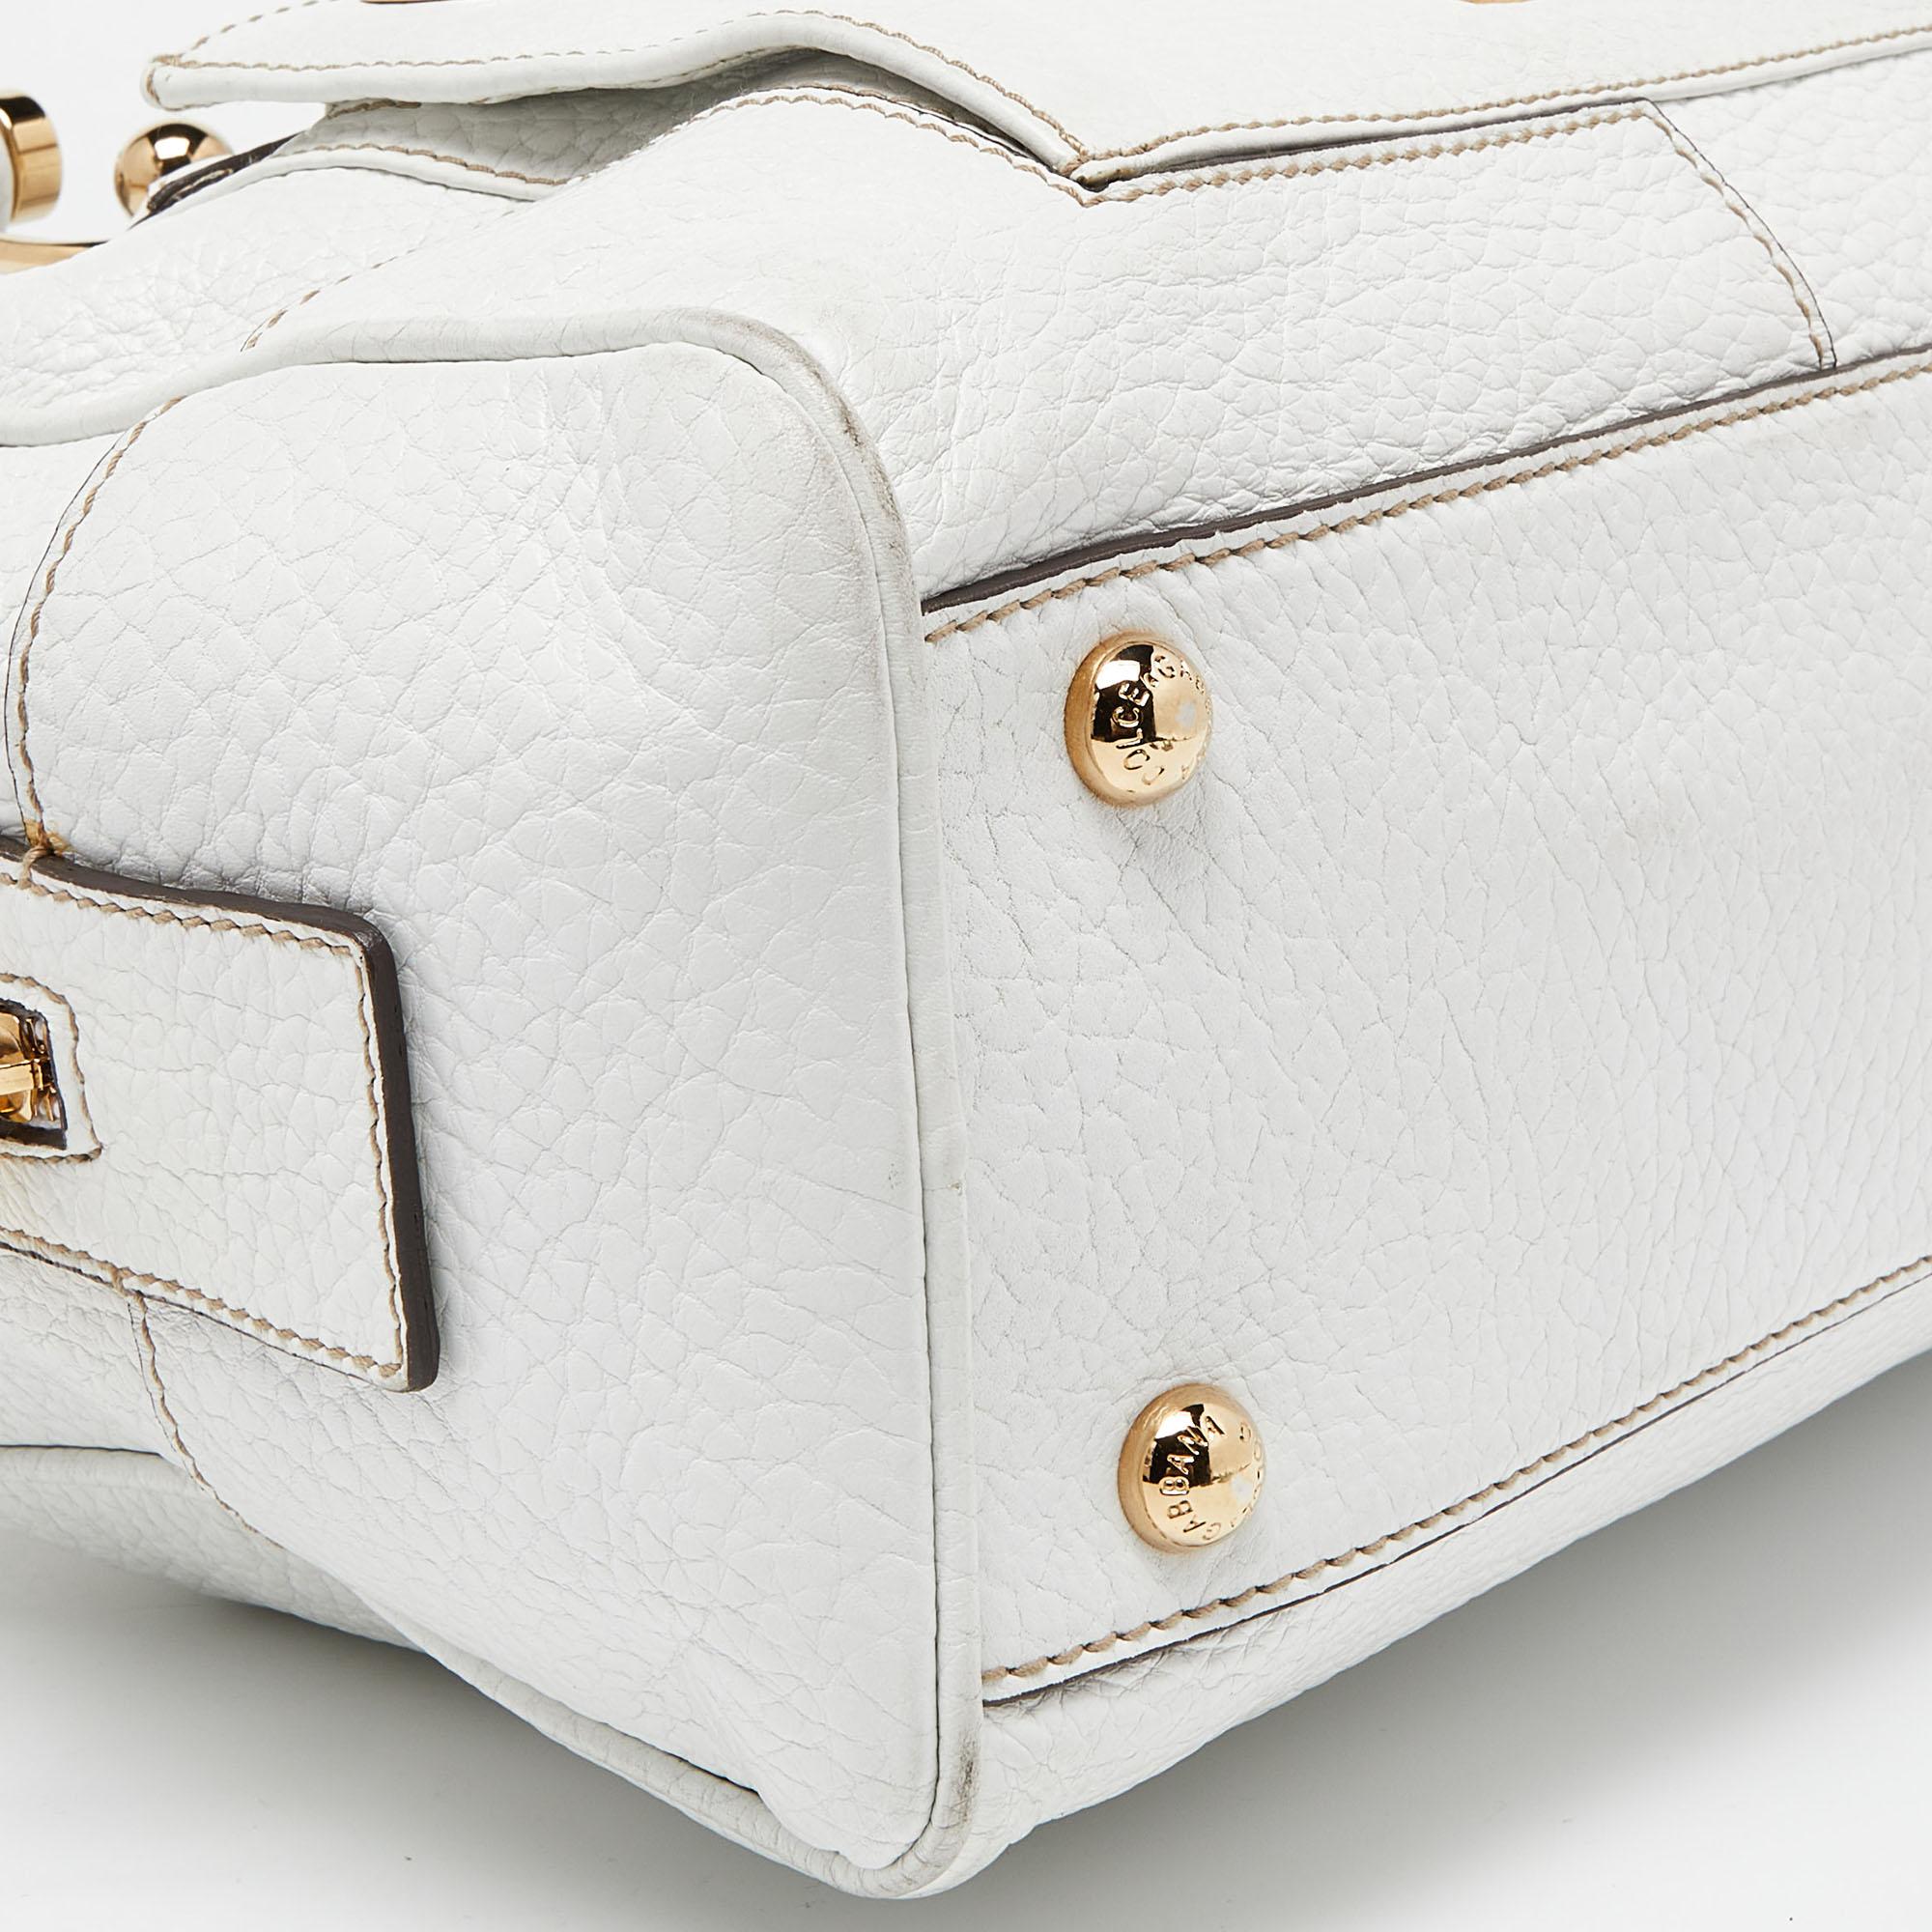 Dolce & Gabbana White Leather Buckle Satchel For Sale 3